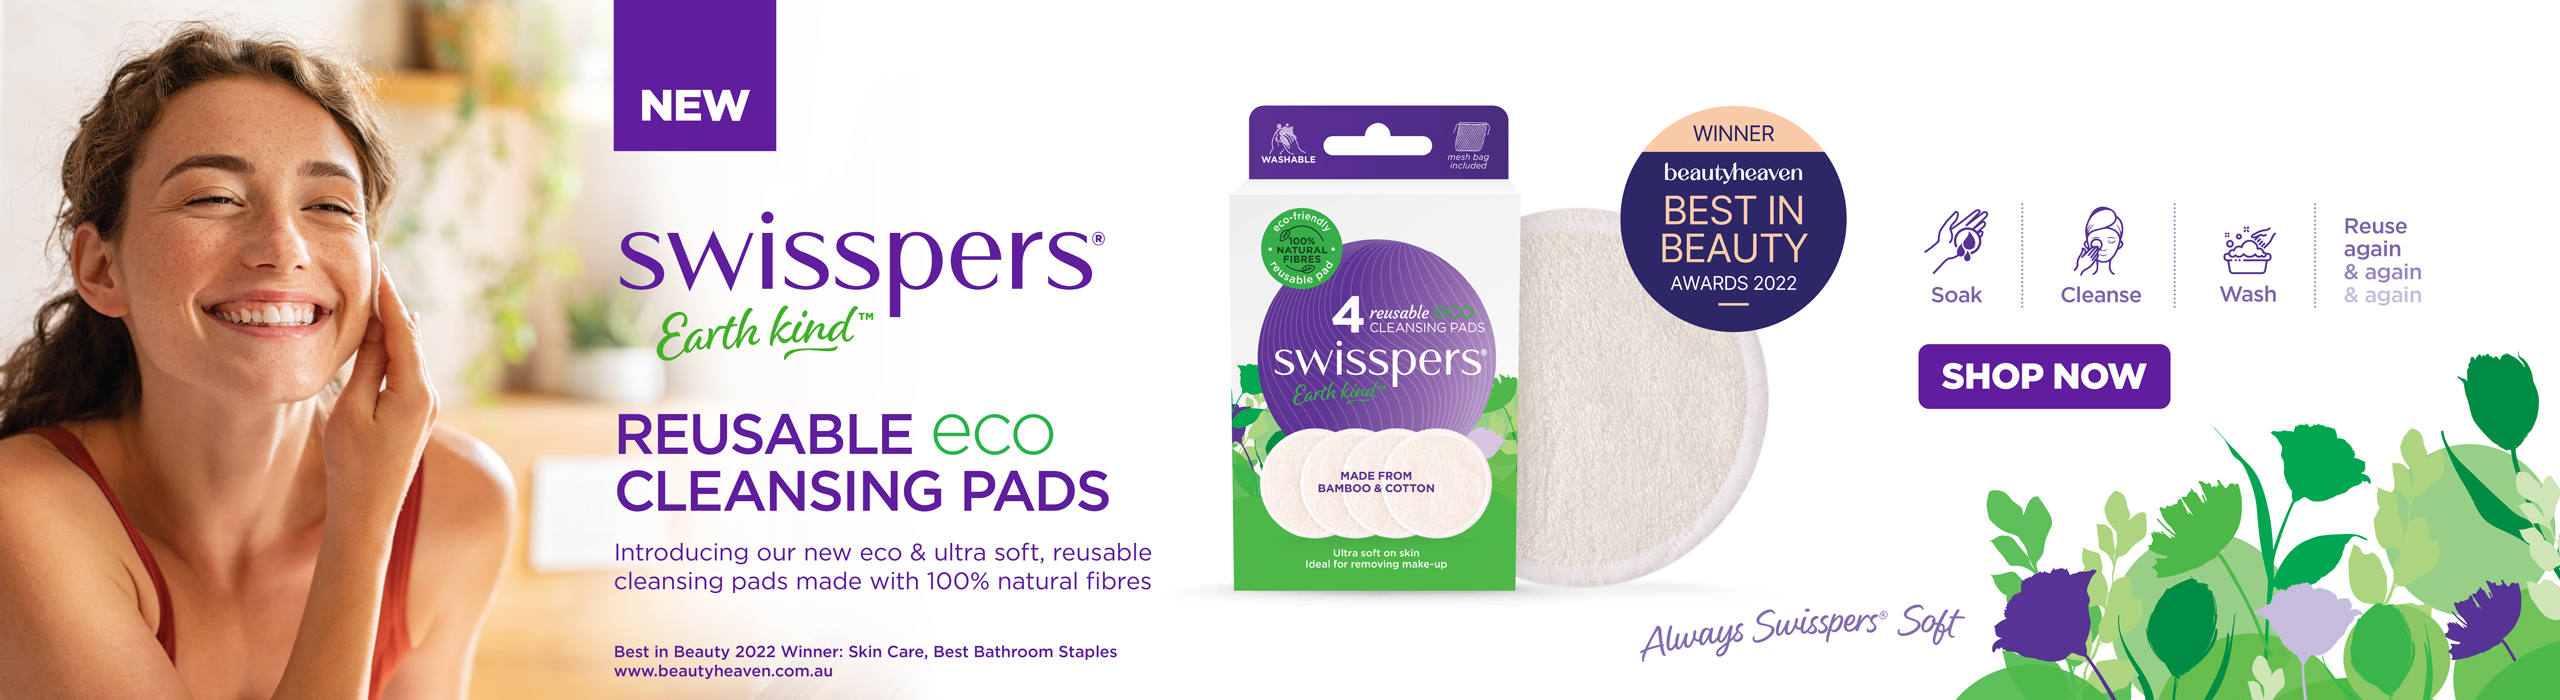 Swisspers Earth Kind Reusable Eco Cleansing Pads